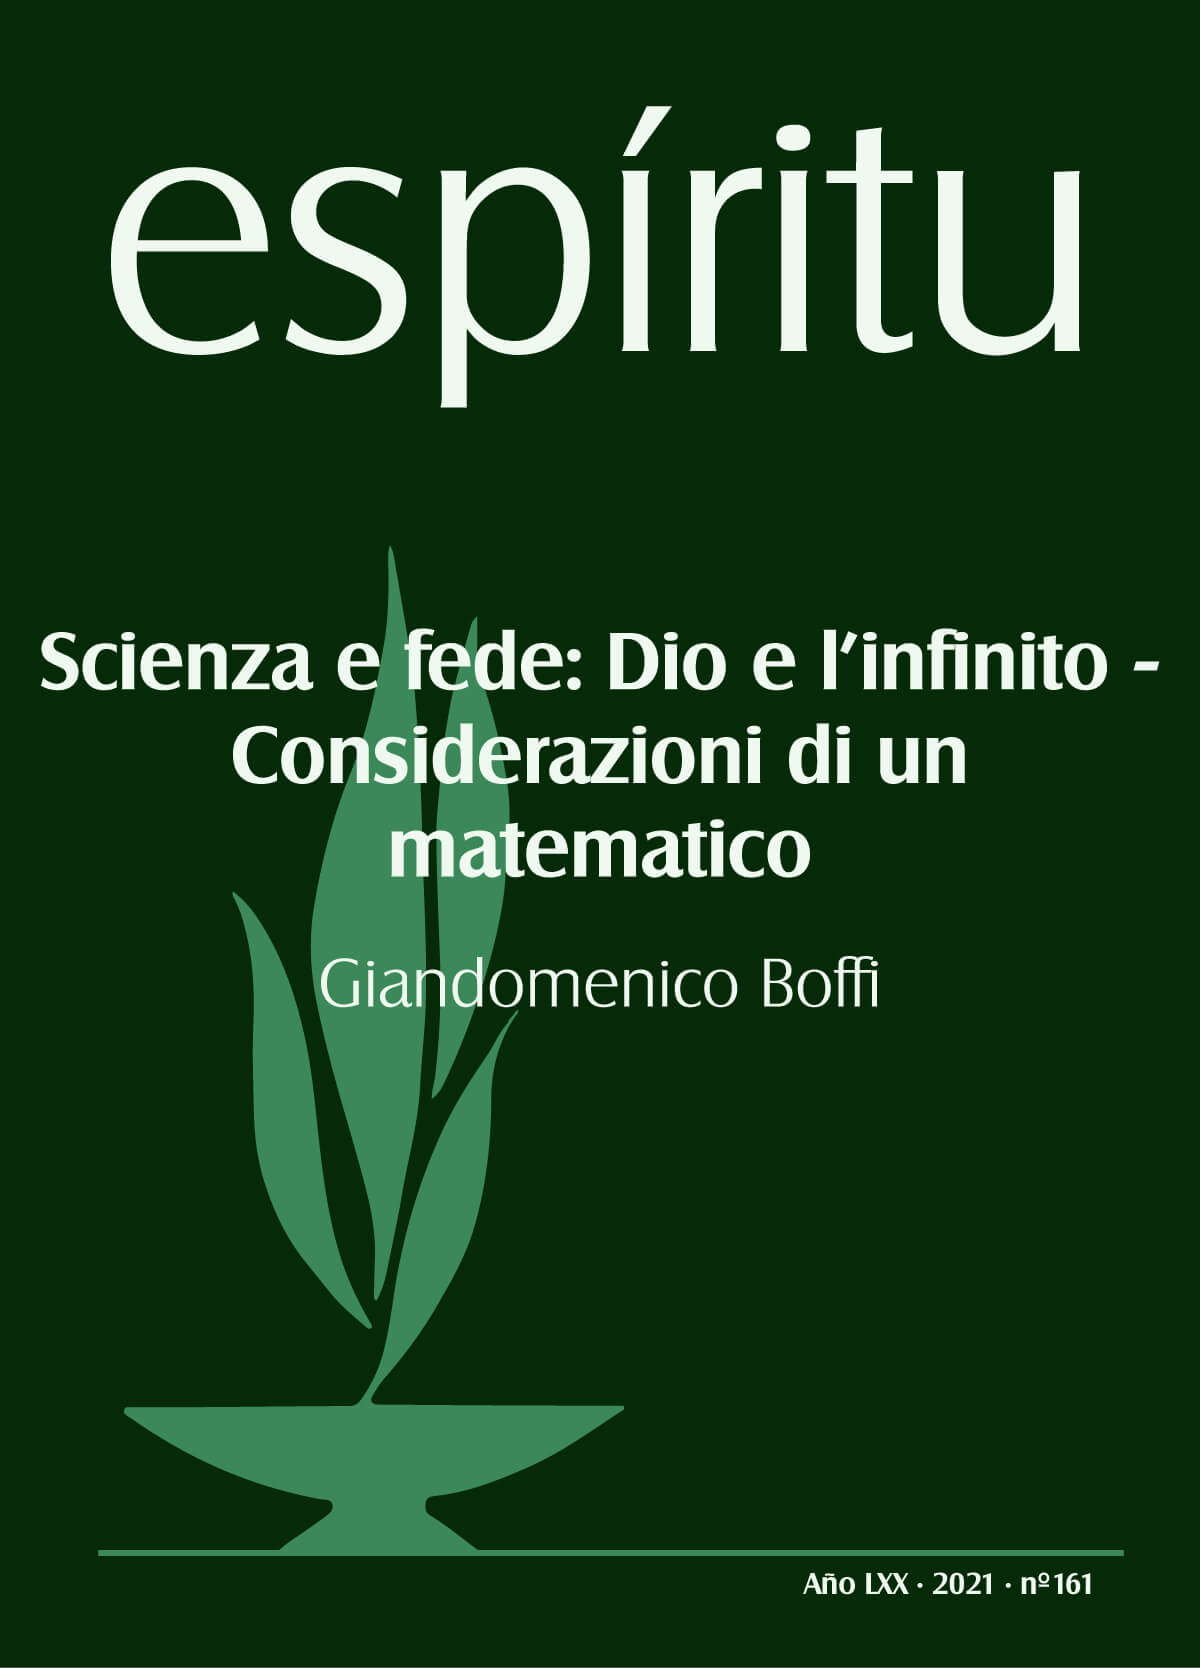 Science and Faith: God and Infinity – Considerations by a Mathematician